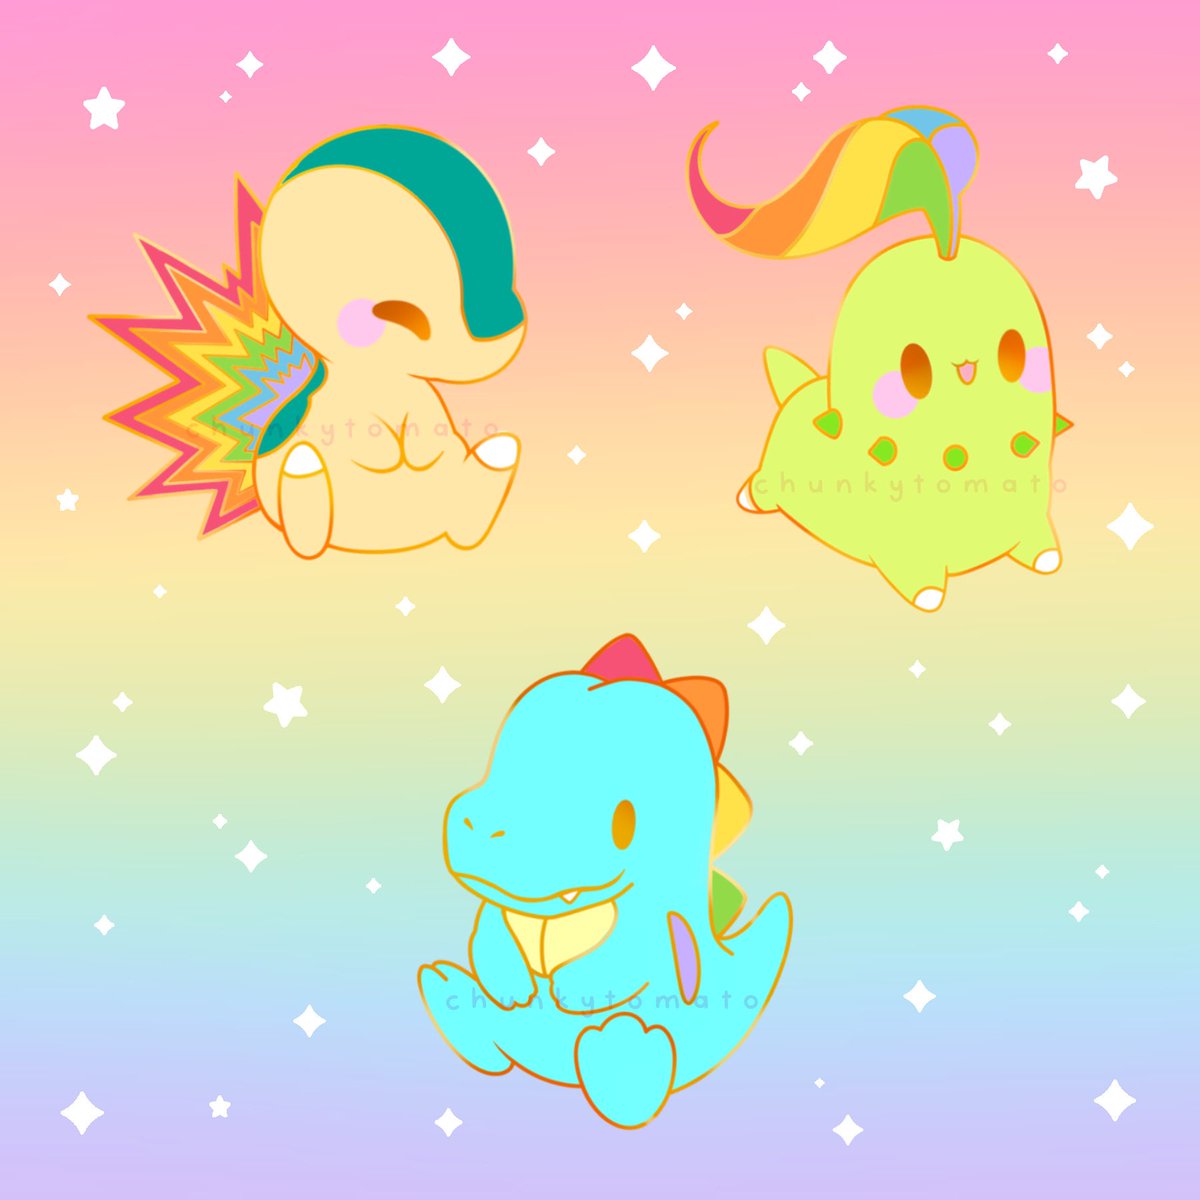 「Put up preorders for these Pokémon Pride」|🍅 chunky tomato 🍅 @ DreamHack AA Row 2のイラスト